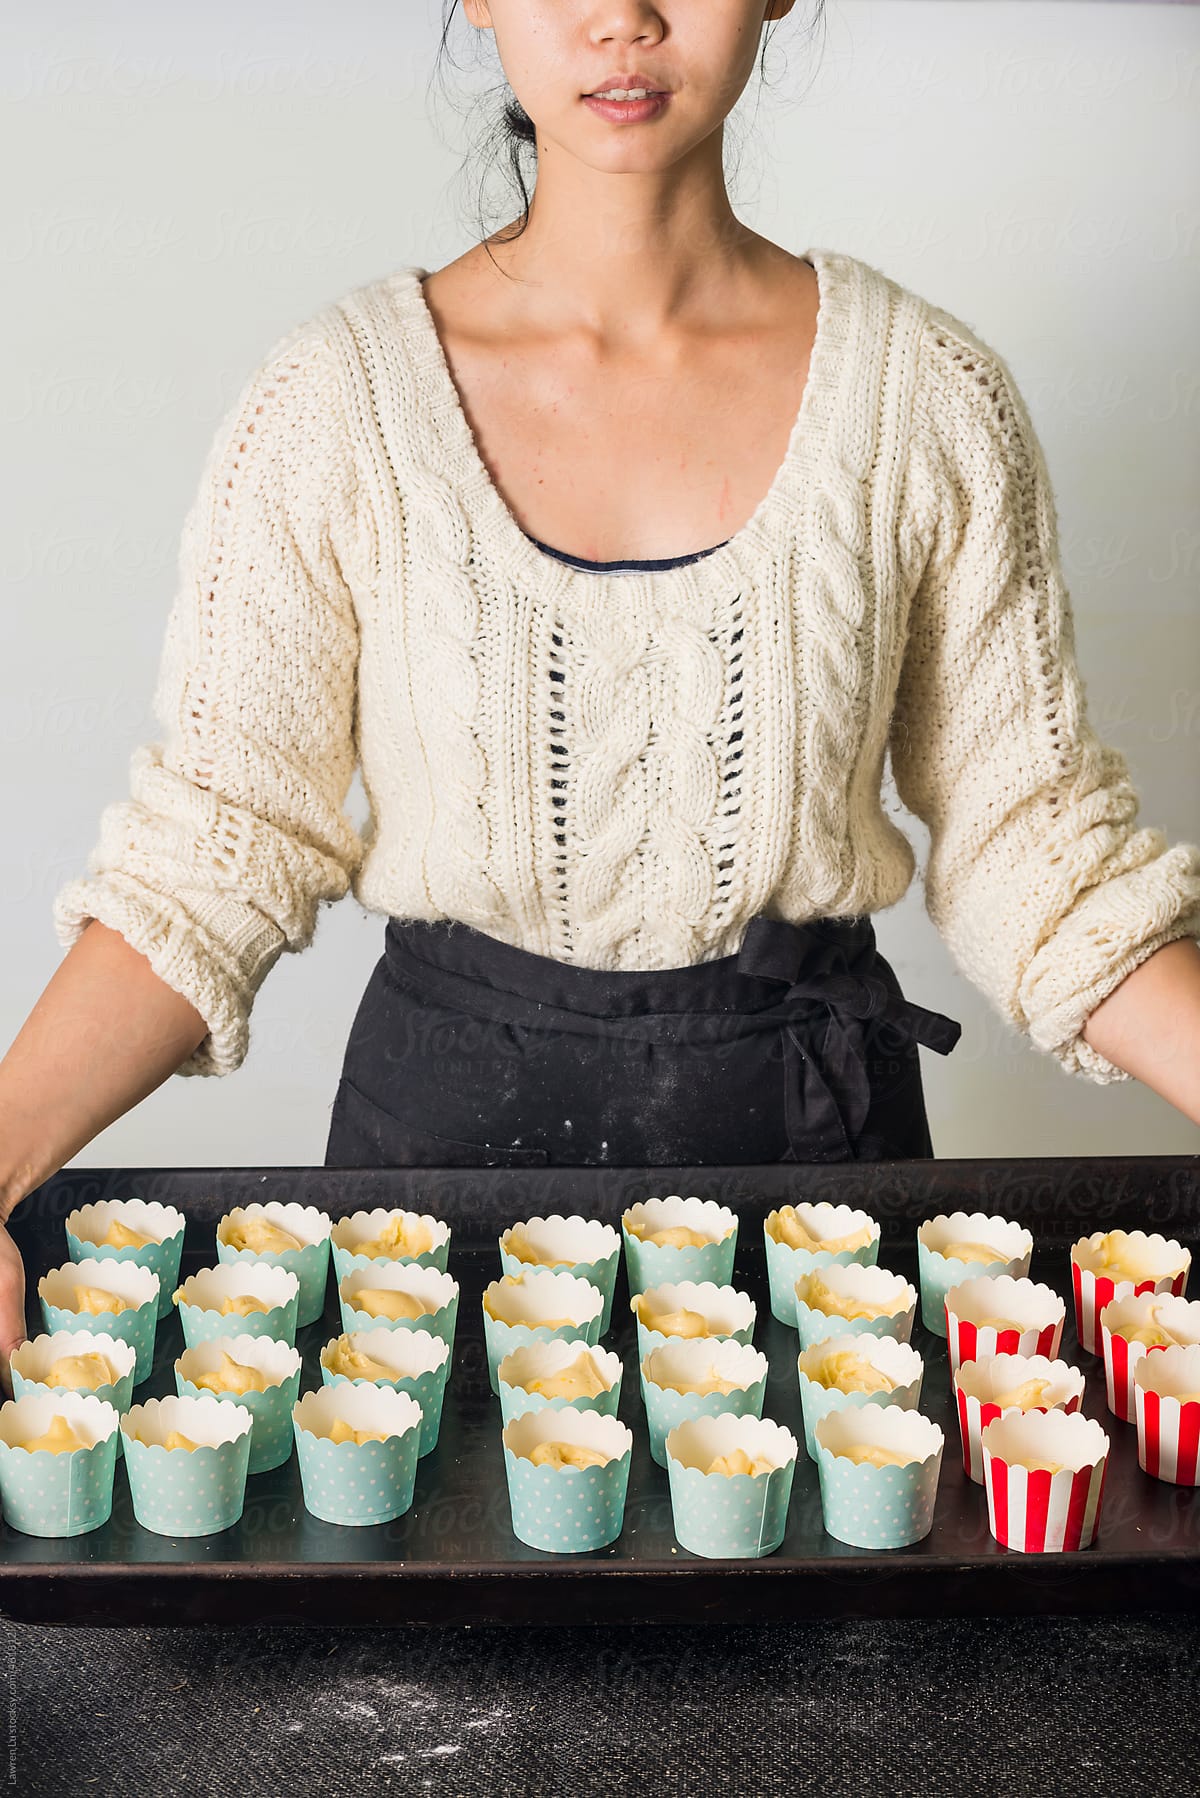 Young woman holding a tray of muffin cake batter- ready for baking.